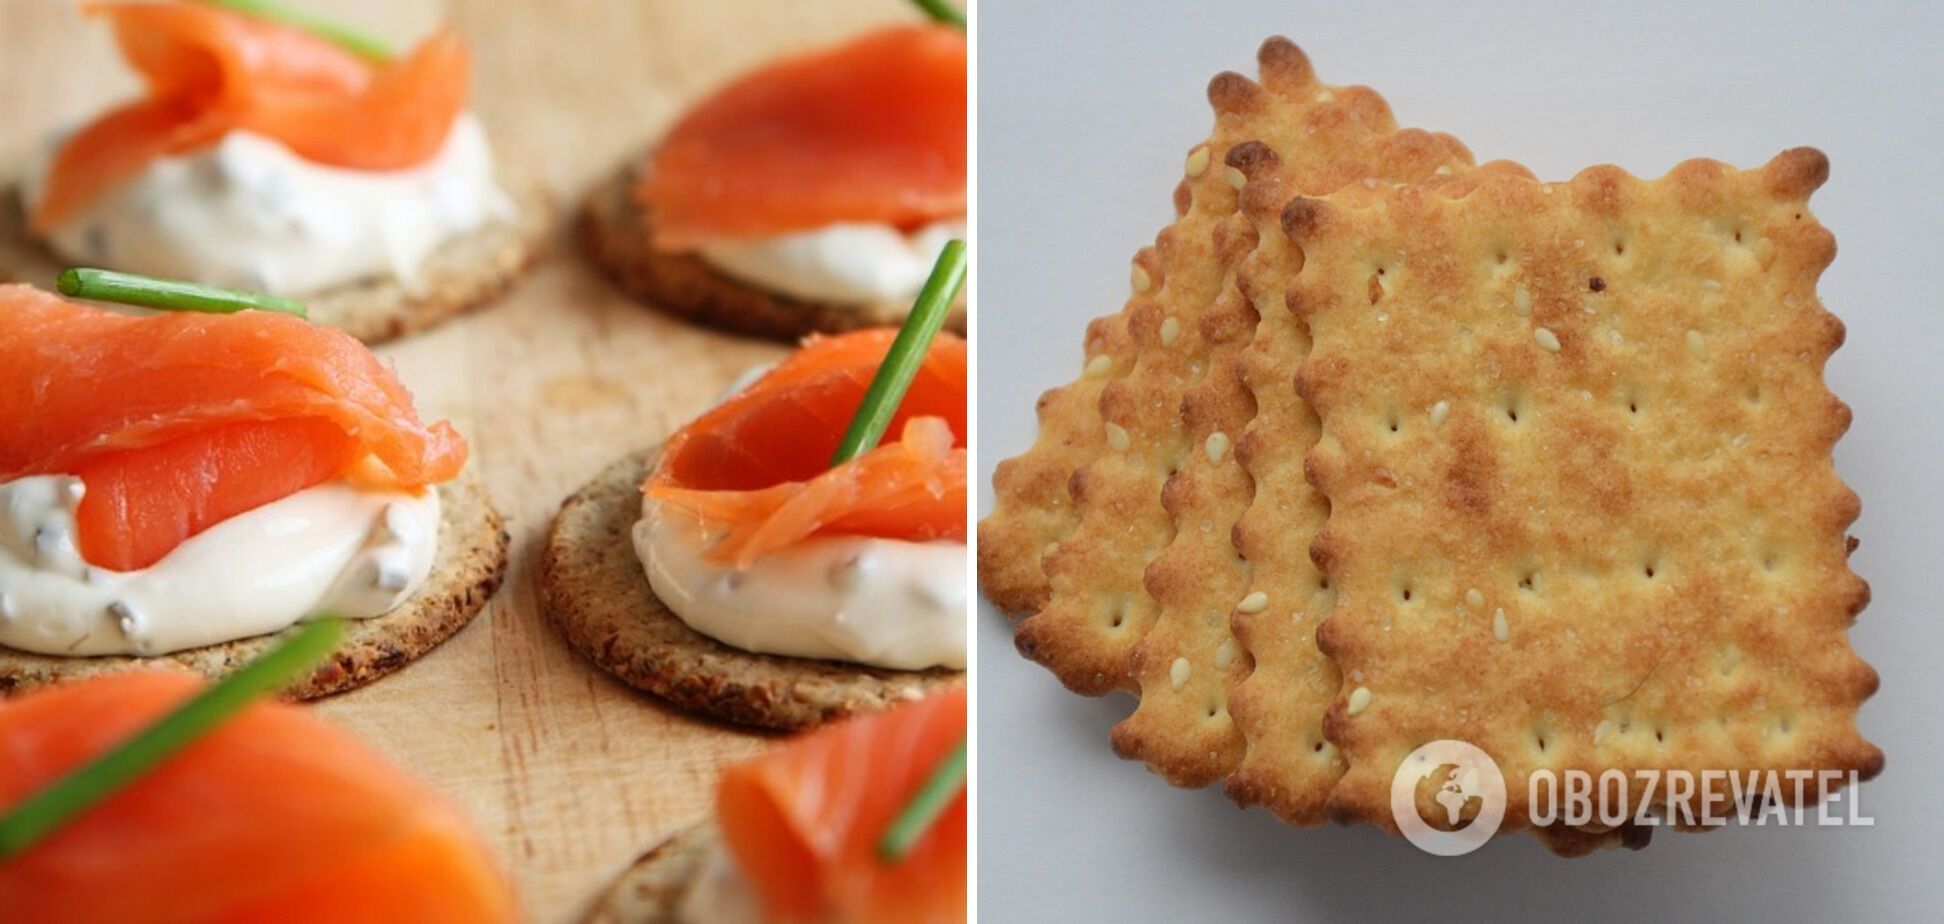 What to make salty homemade crackers from